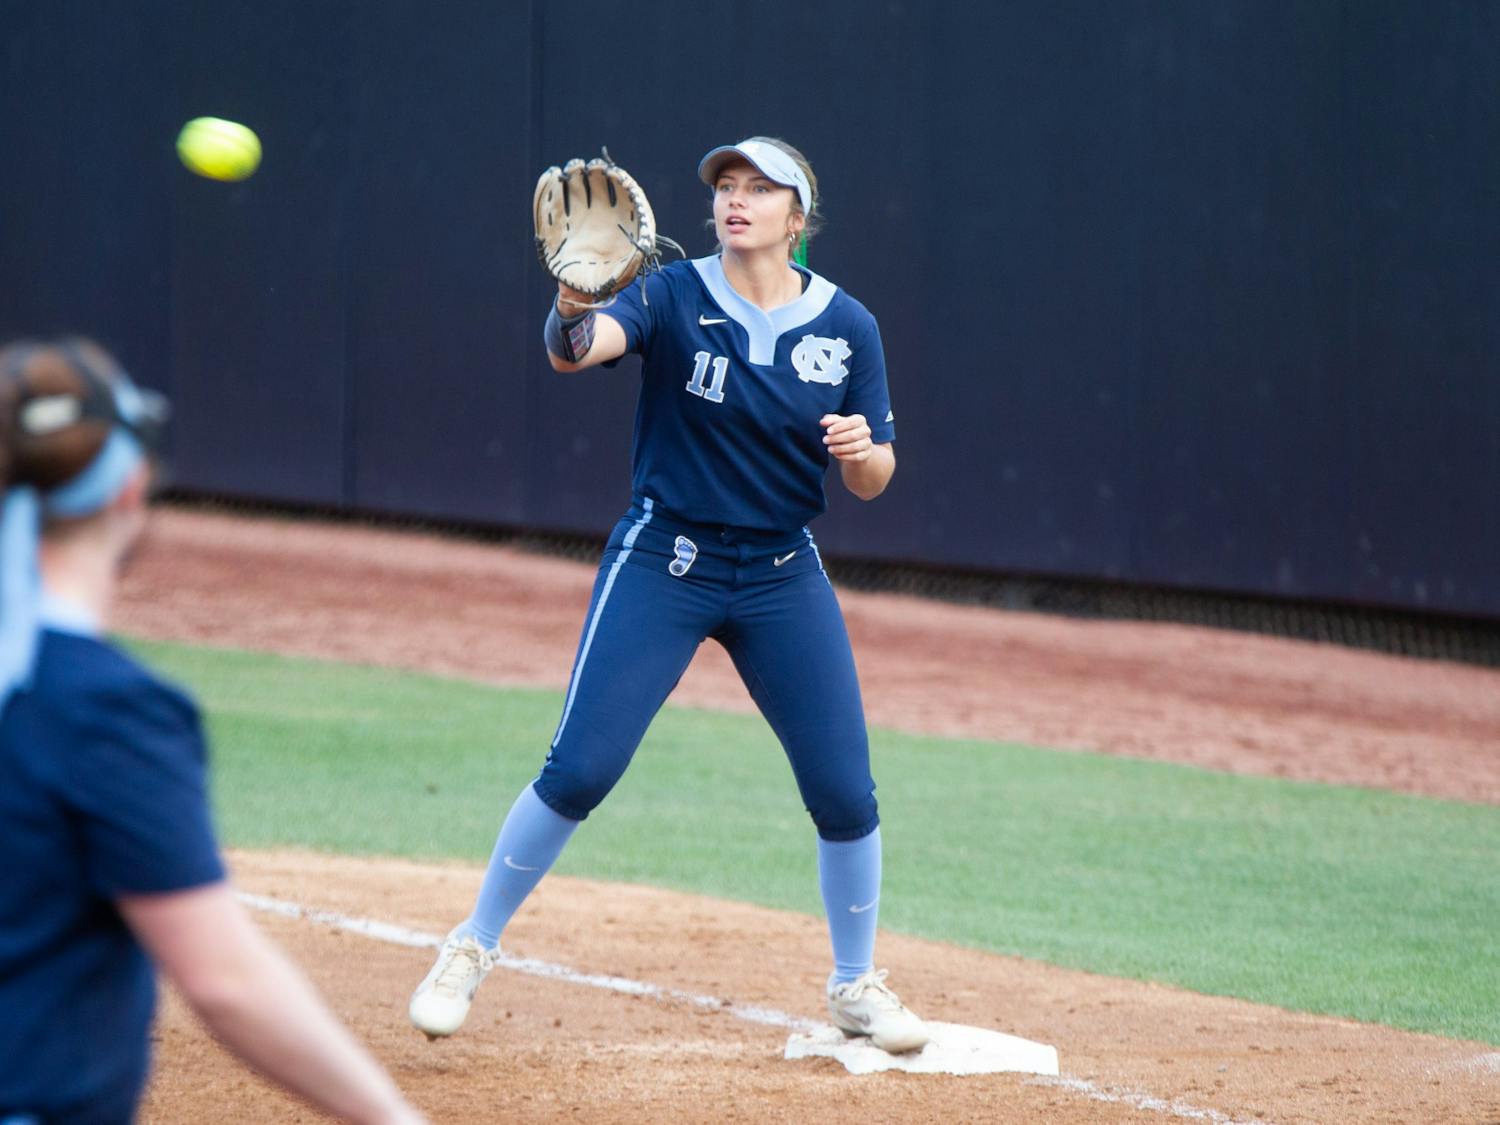 UNC junior infielder Katie Perkins (11) catches the ball at first base to get a runner out during a home game against N.C. Central at Anderson Stadium on Wednesday, Apr. 20, 2022.